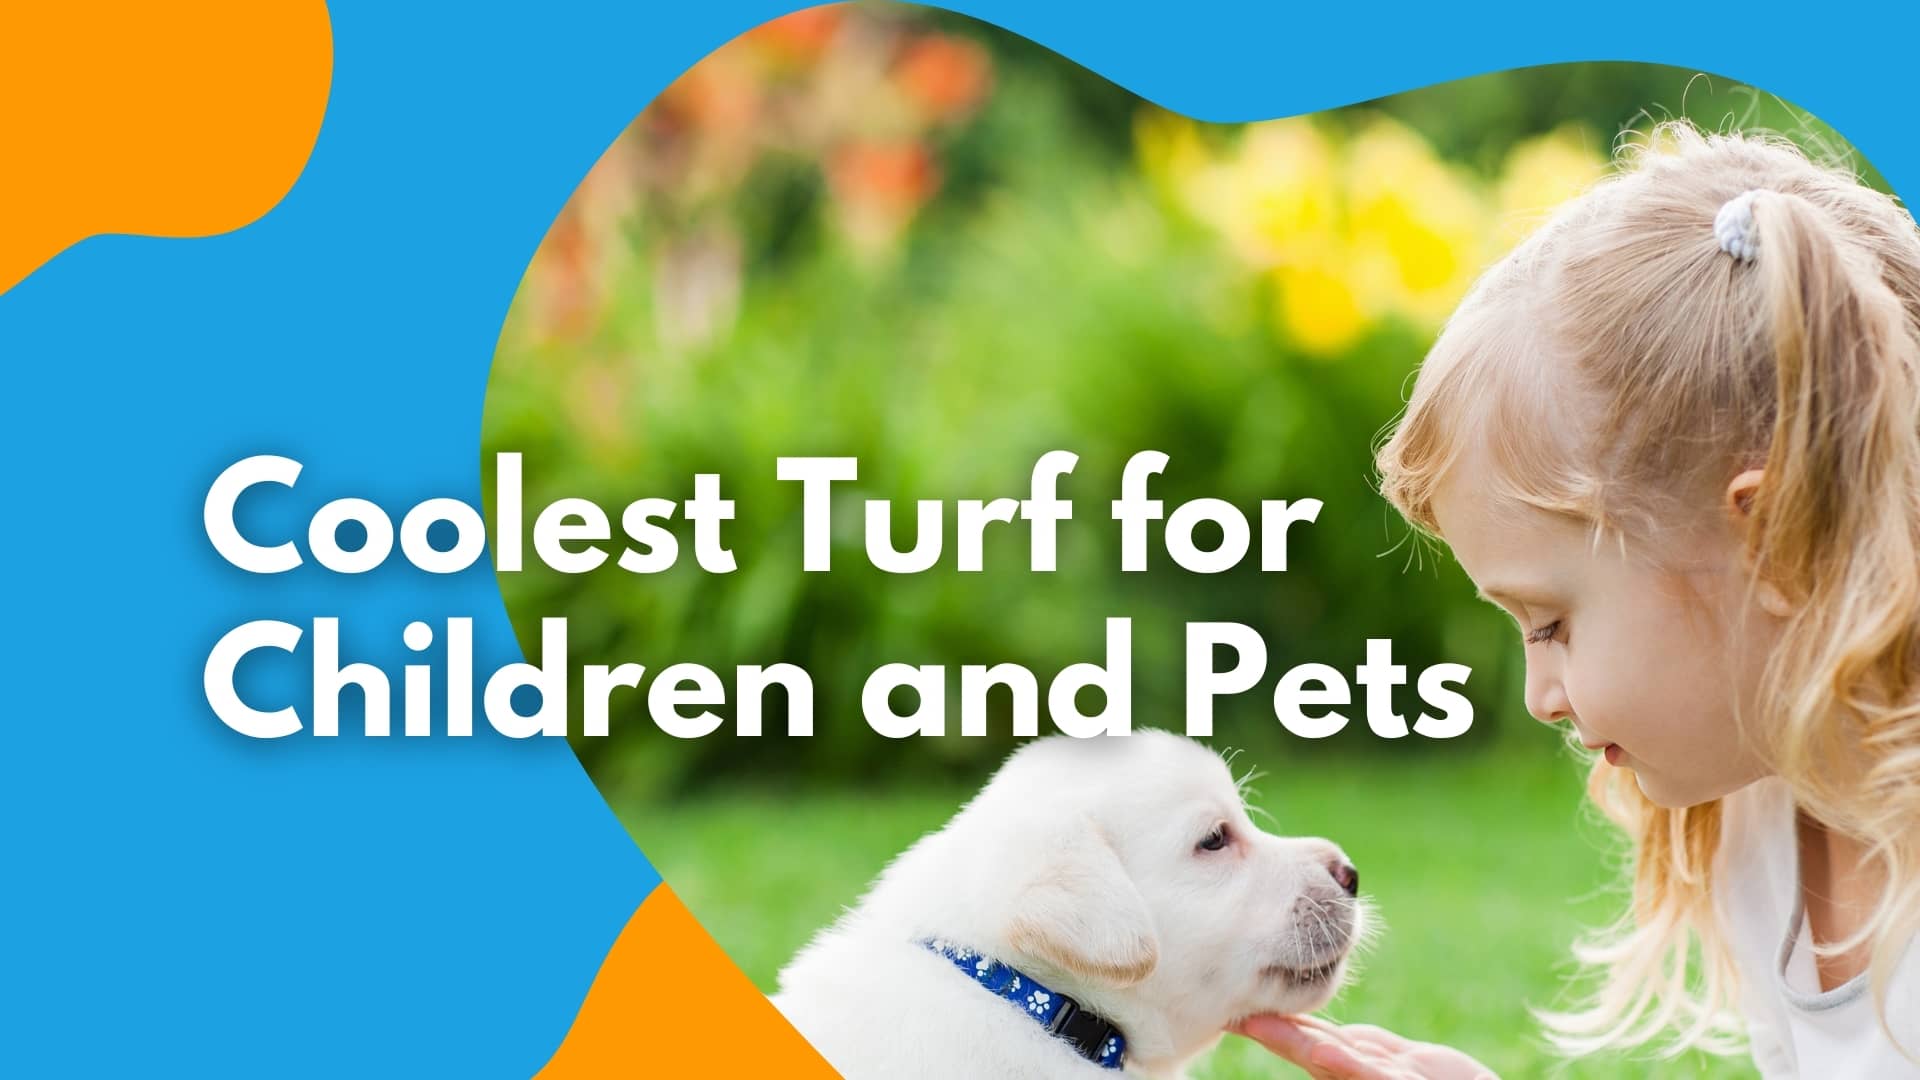 Coolest Turf For Children and Pets